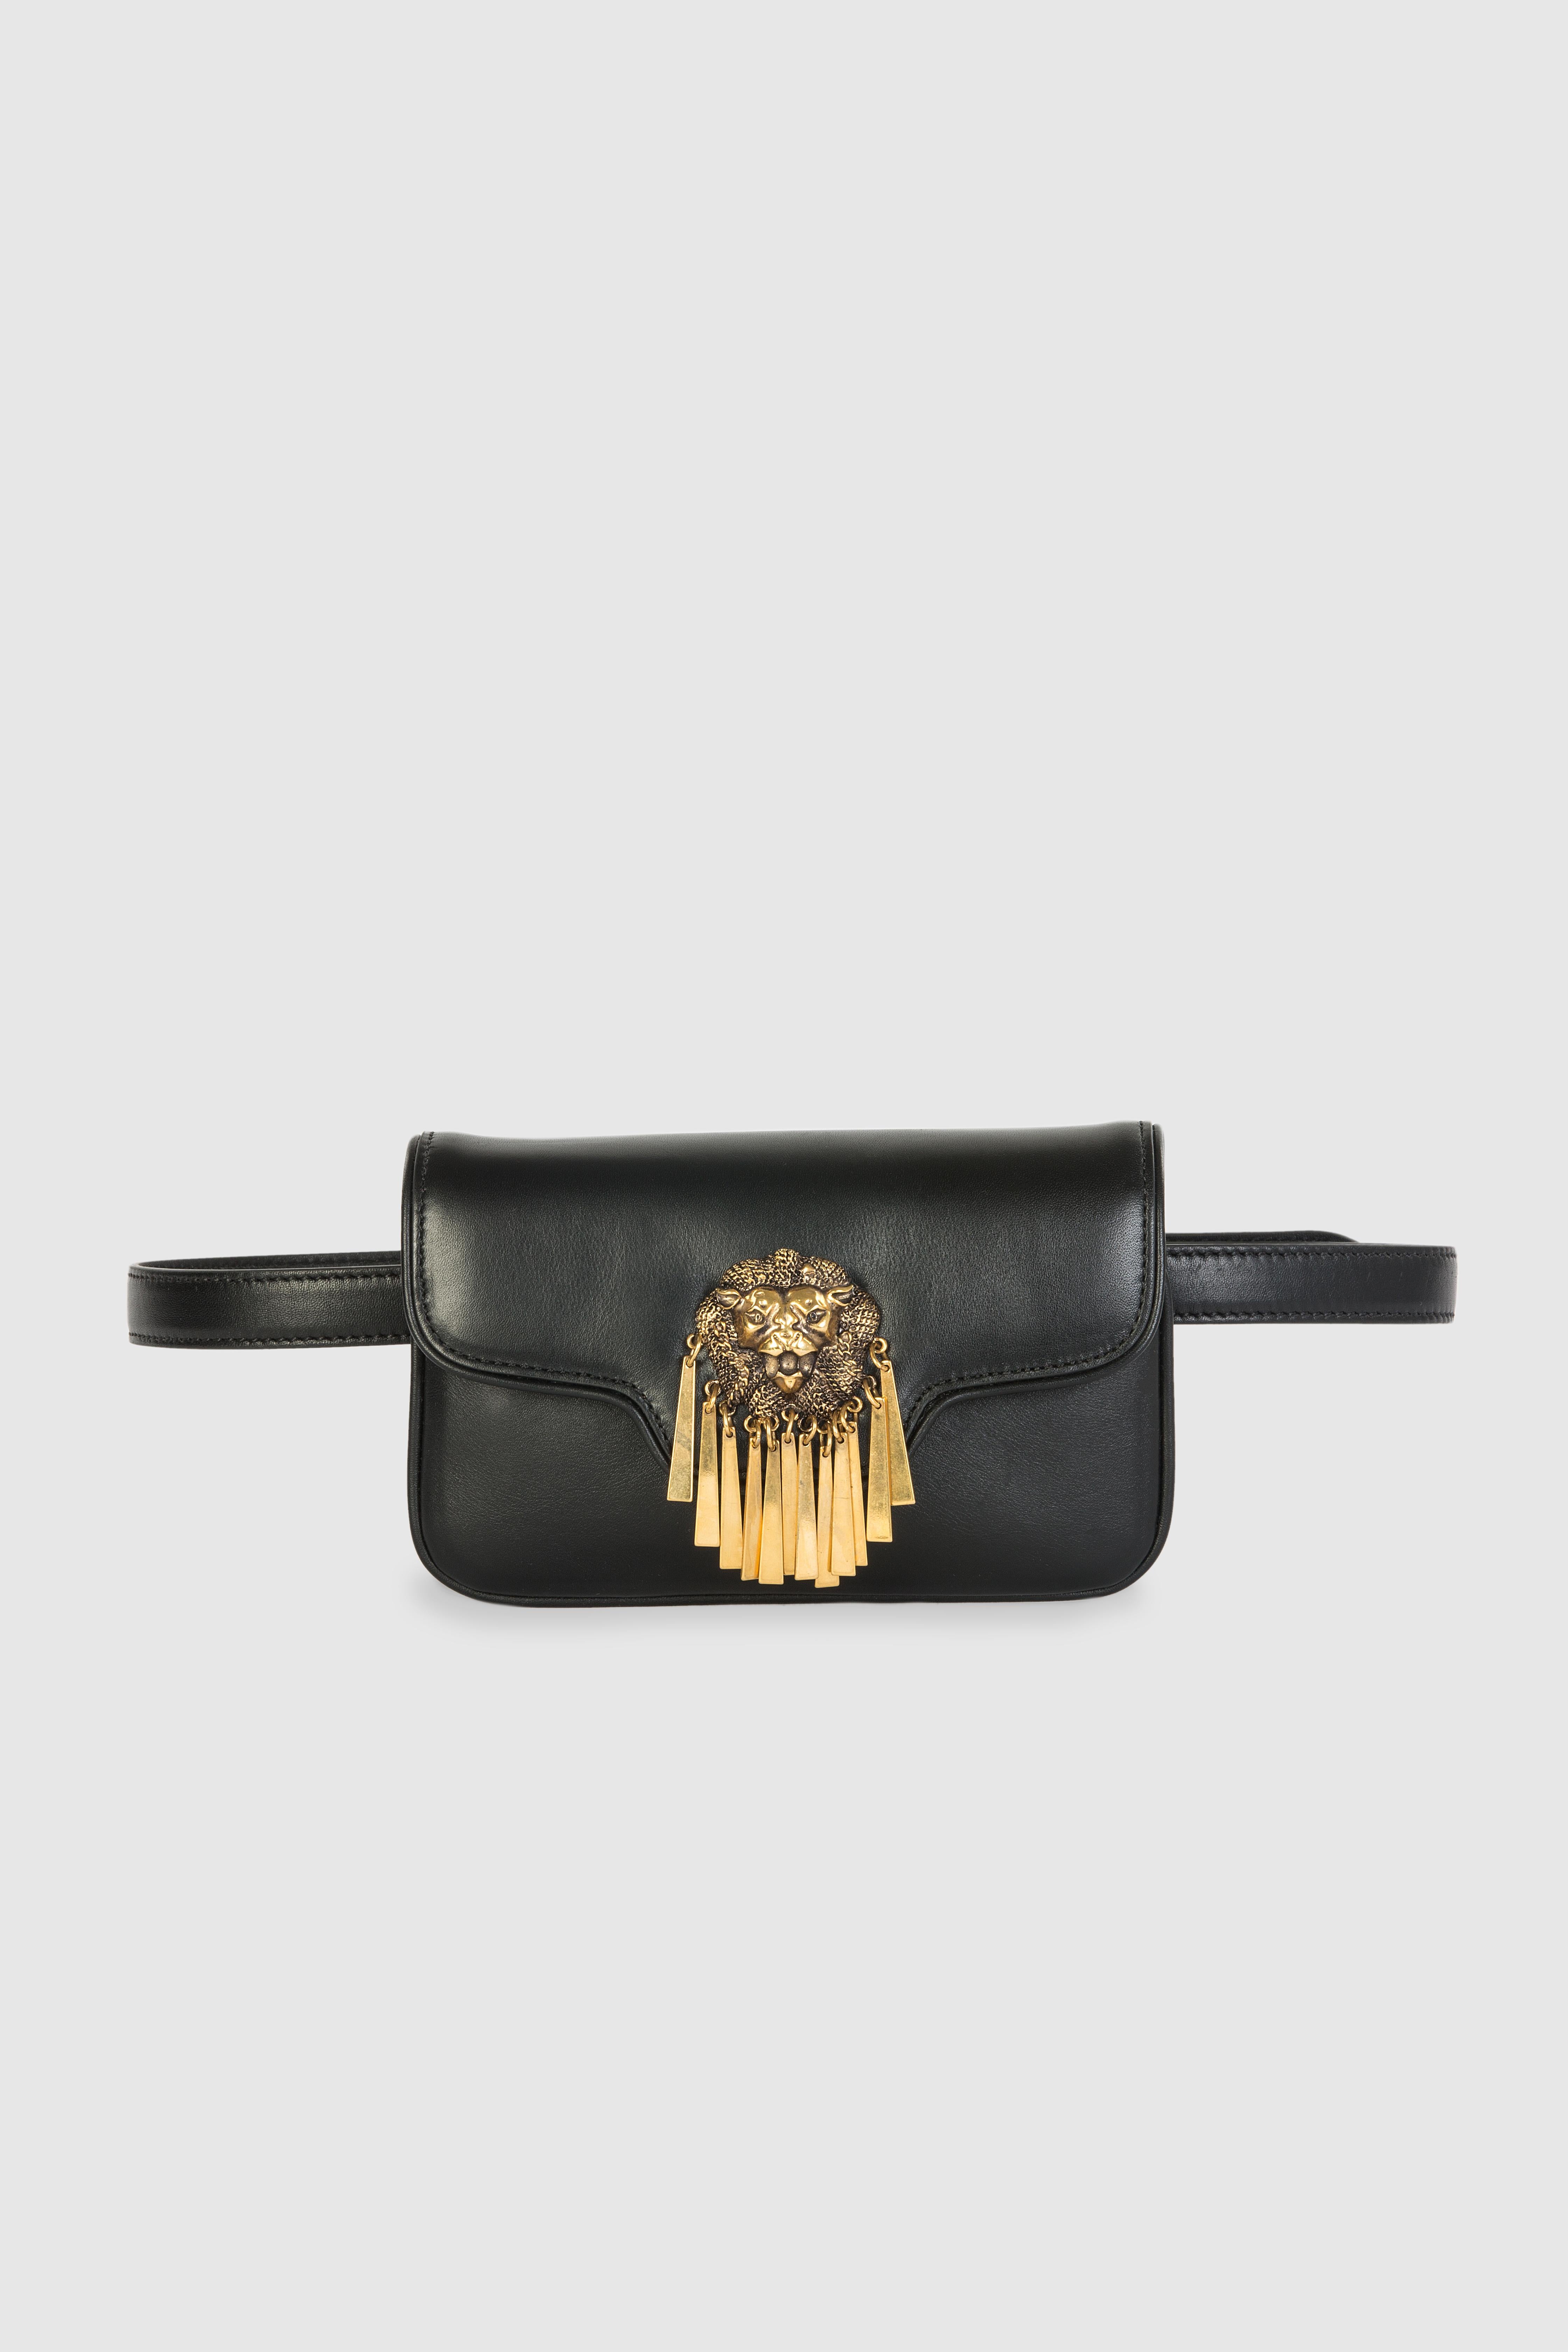 black leather bag with gold hardware